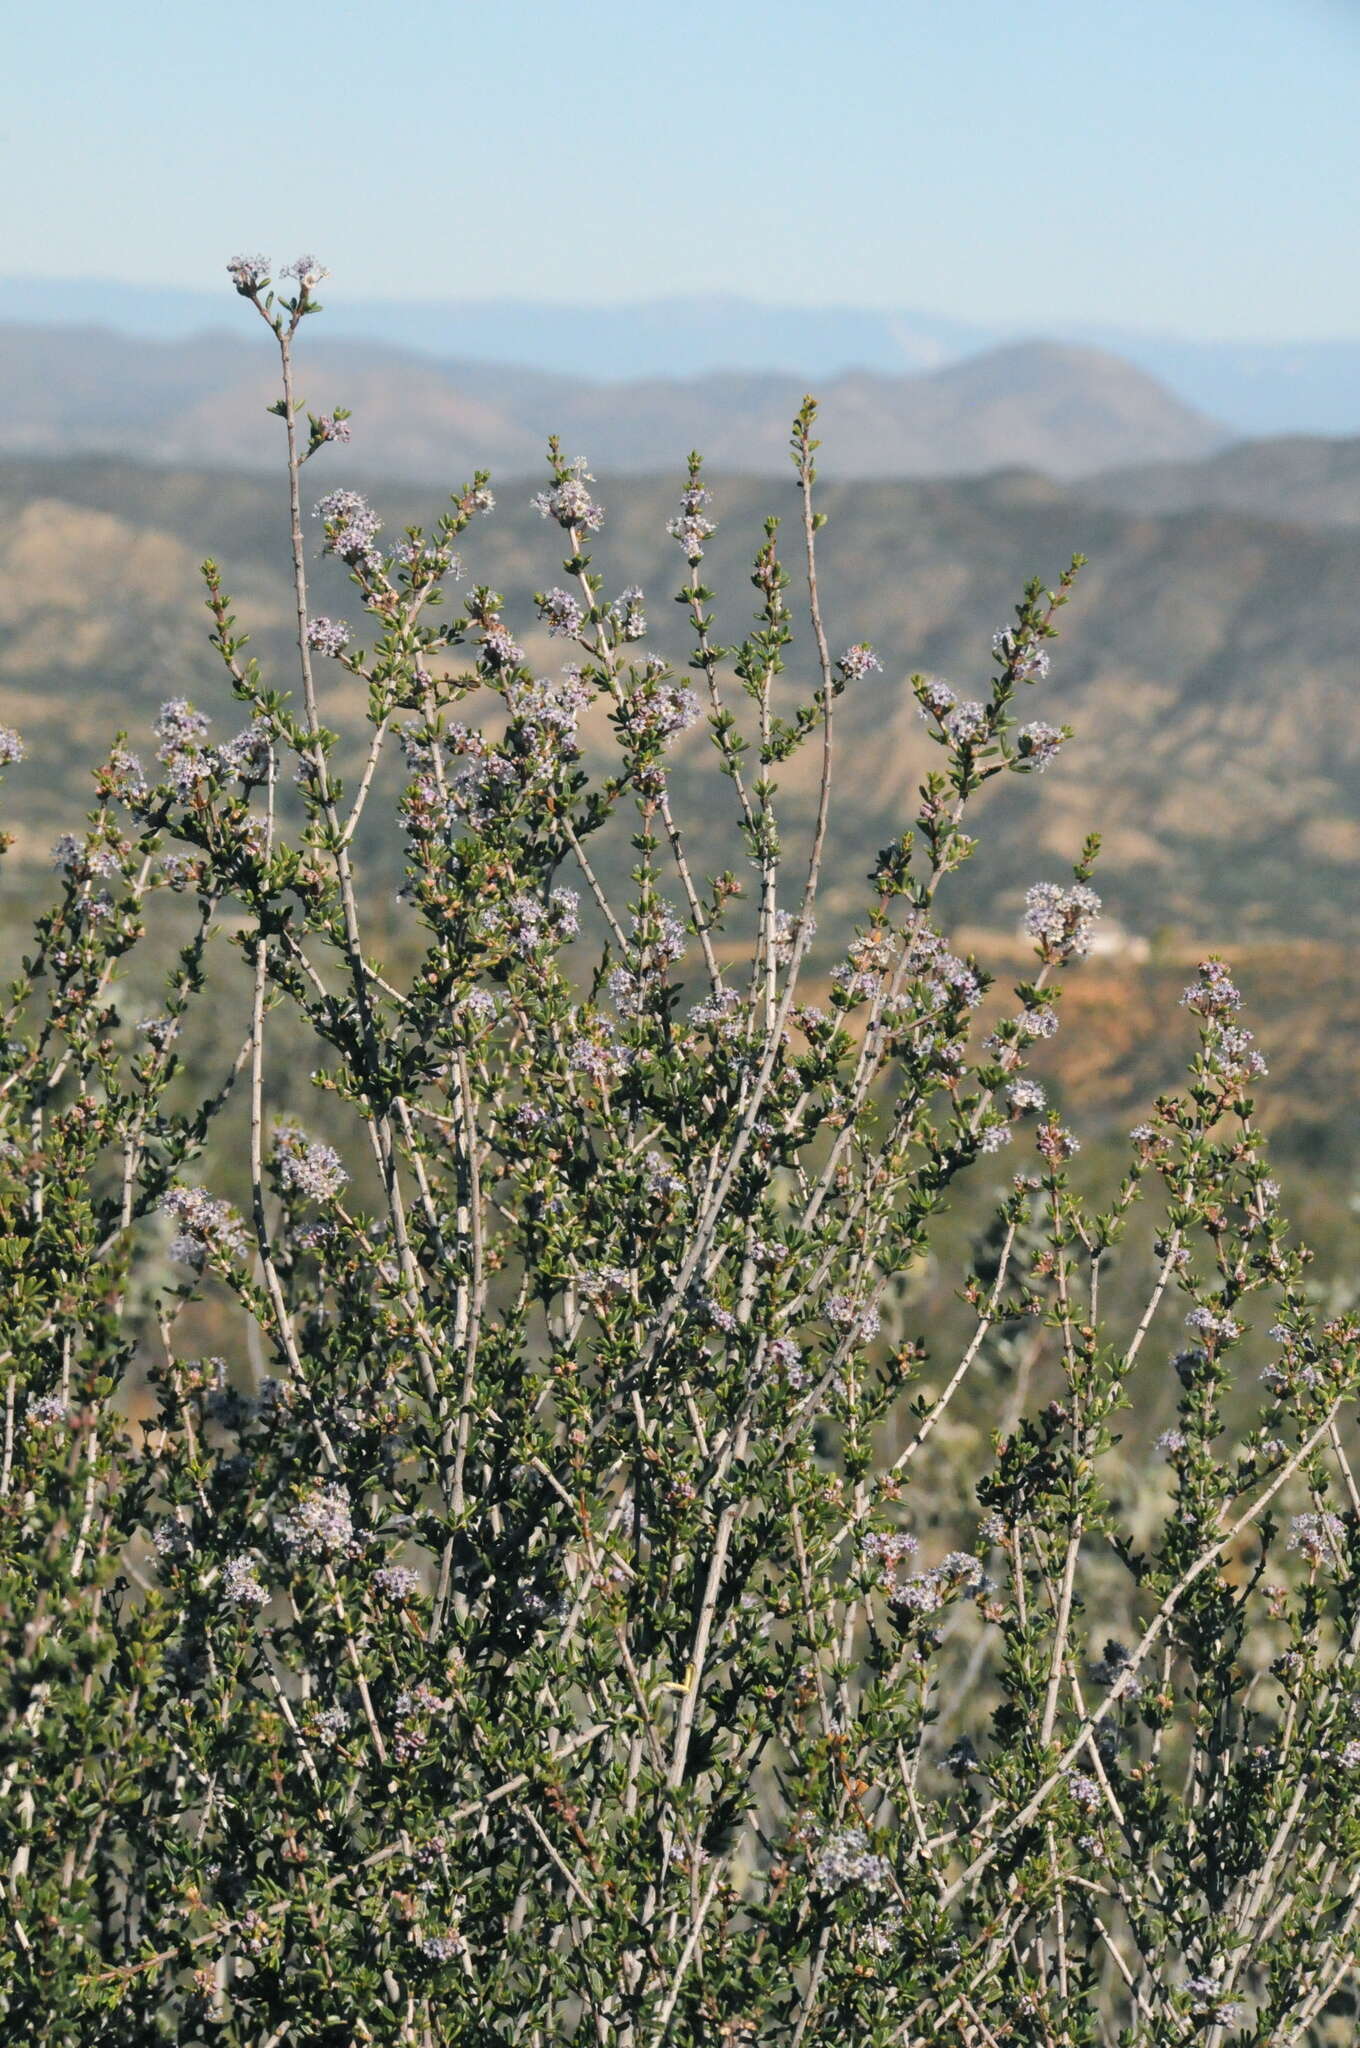 Image of Vail Lake ceanothus